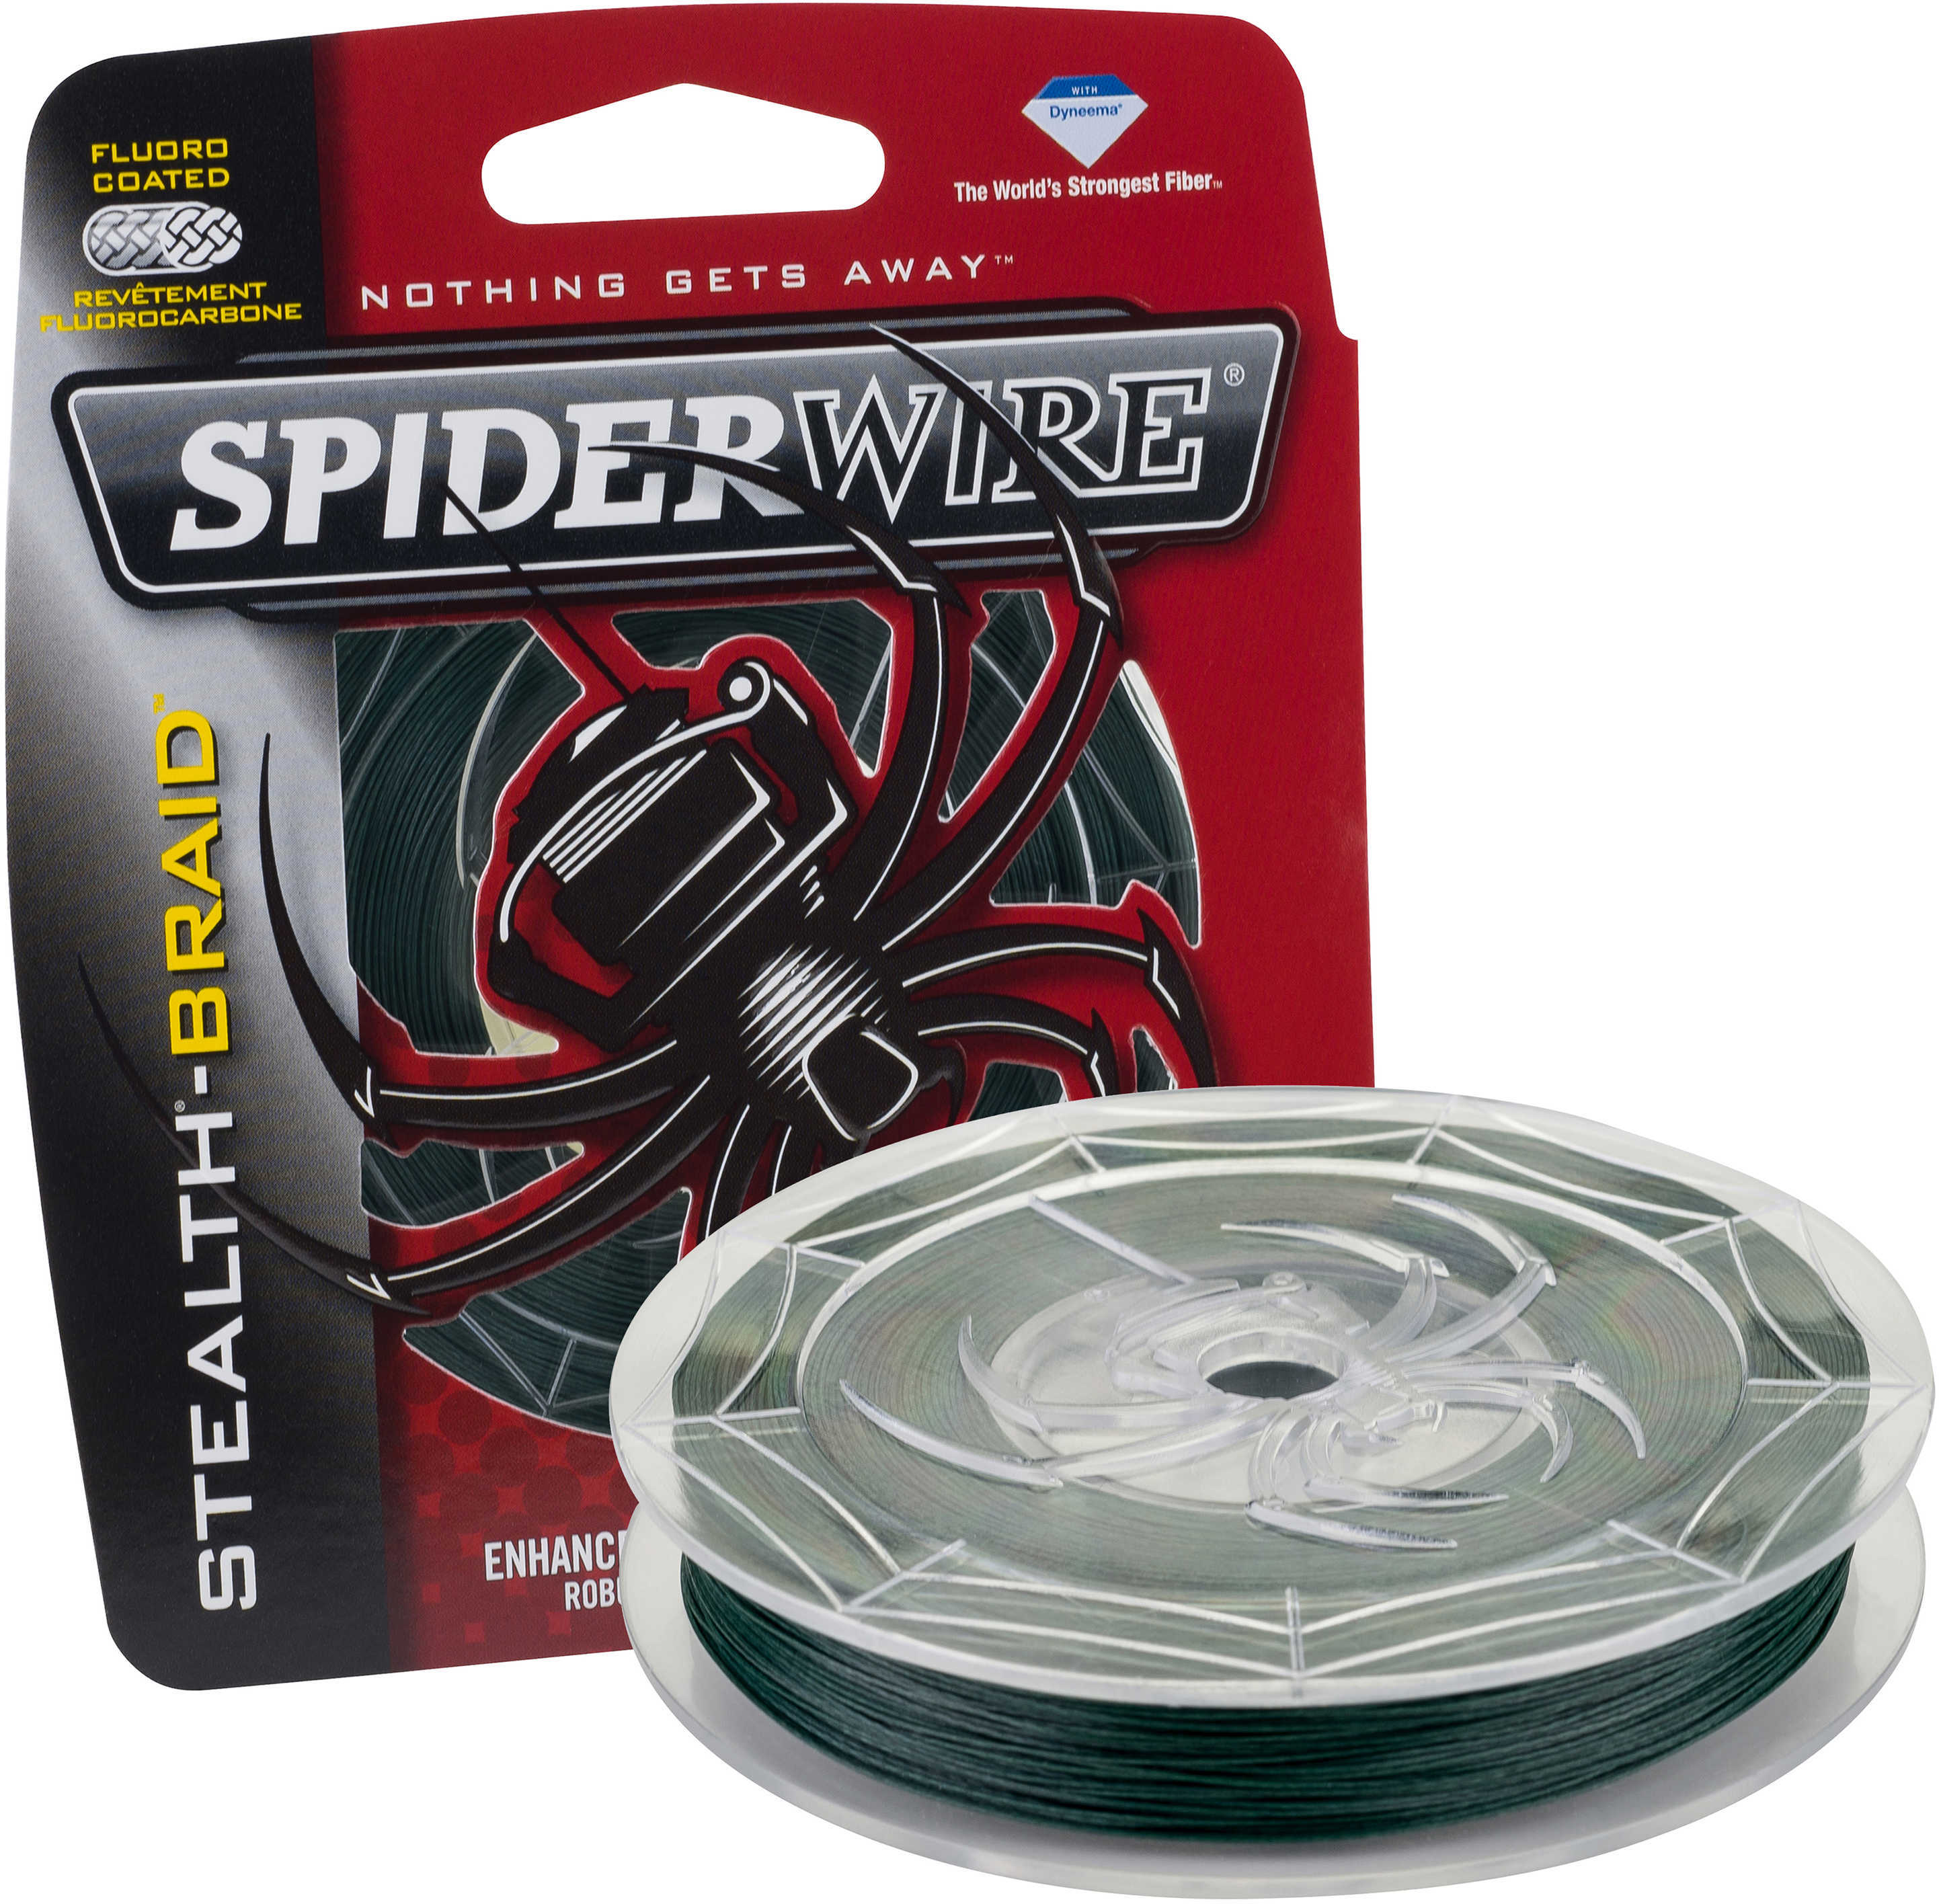 Spiderwire Stealth Braid 200 Yards , 6 lbs Strength, 0.005" Diameter, Moss Green Md: 1374595